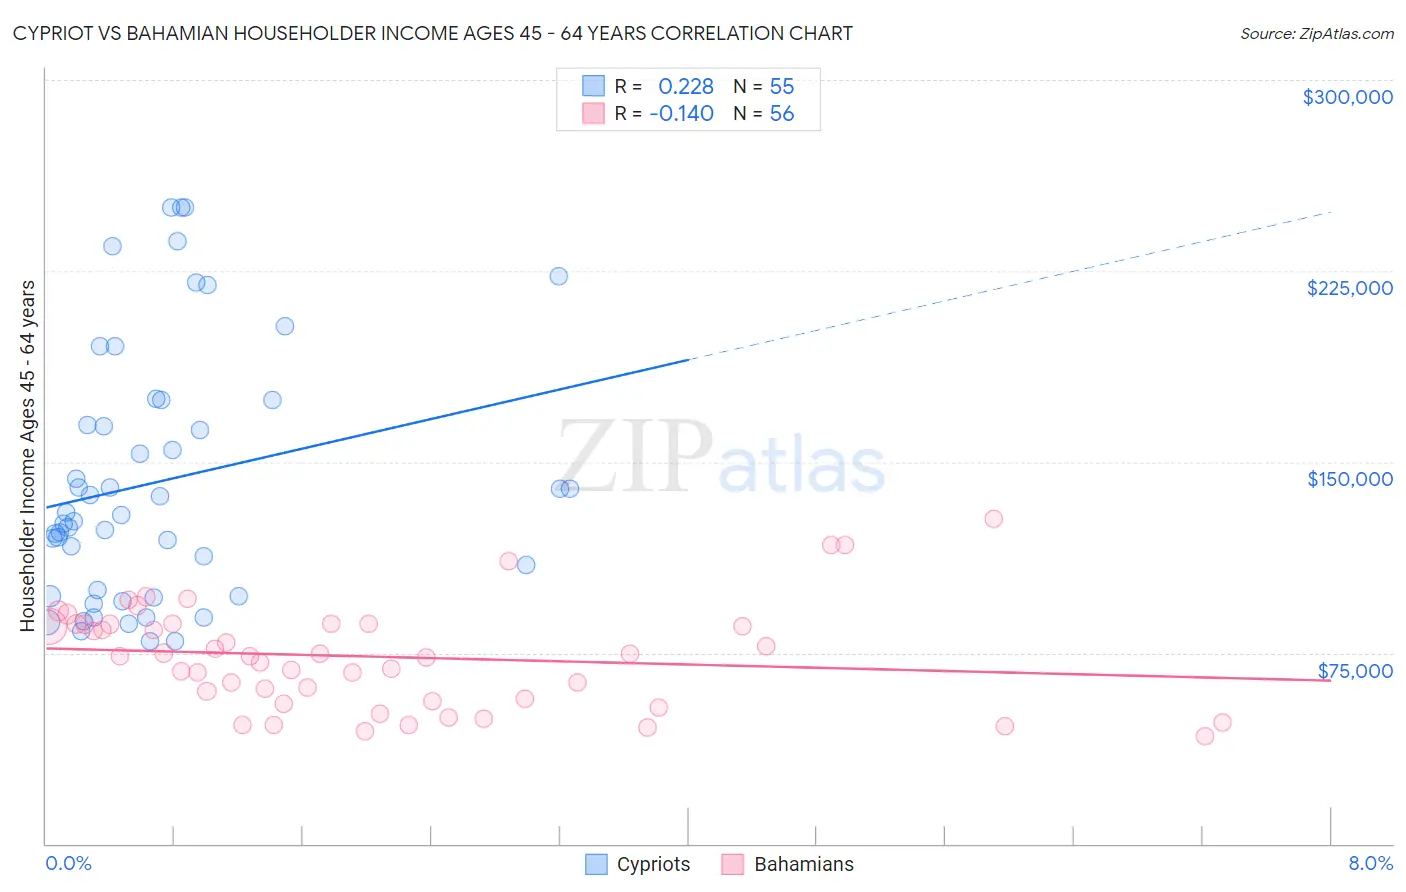 Cypriot vs Bahamian Householder Income Ages 45 - 64 years